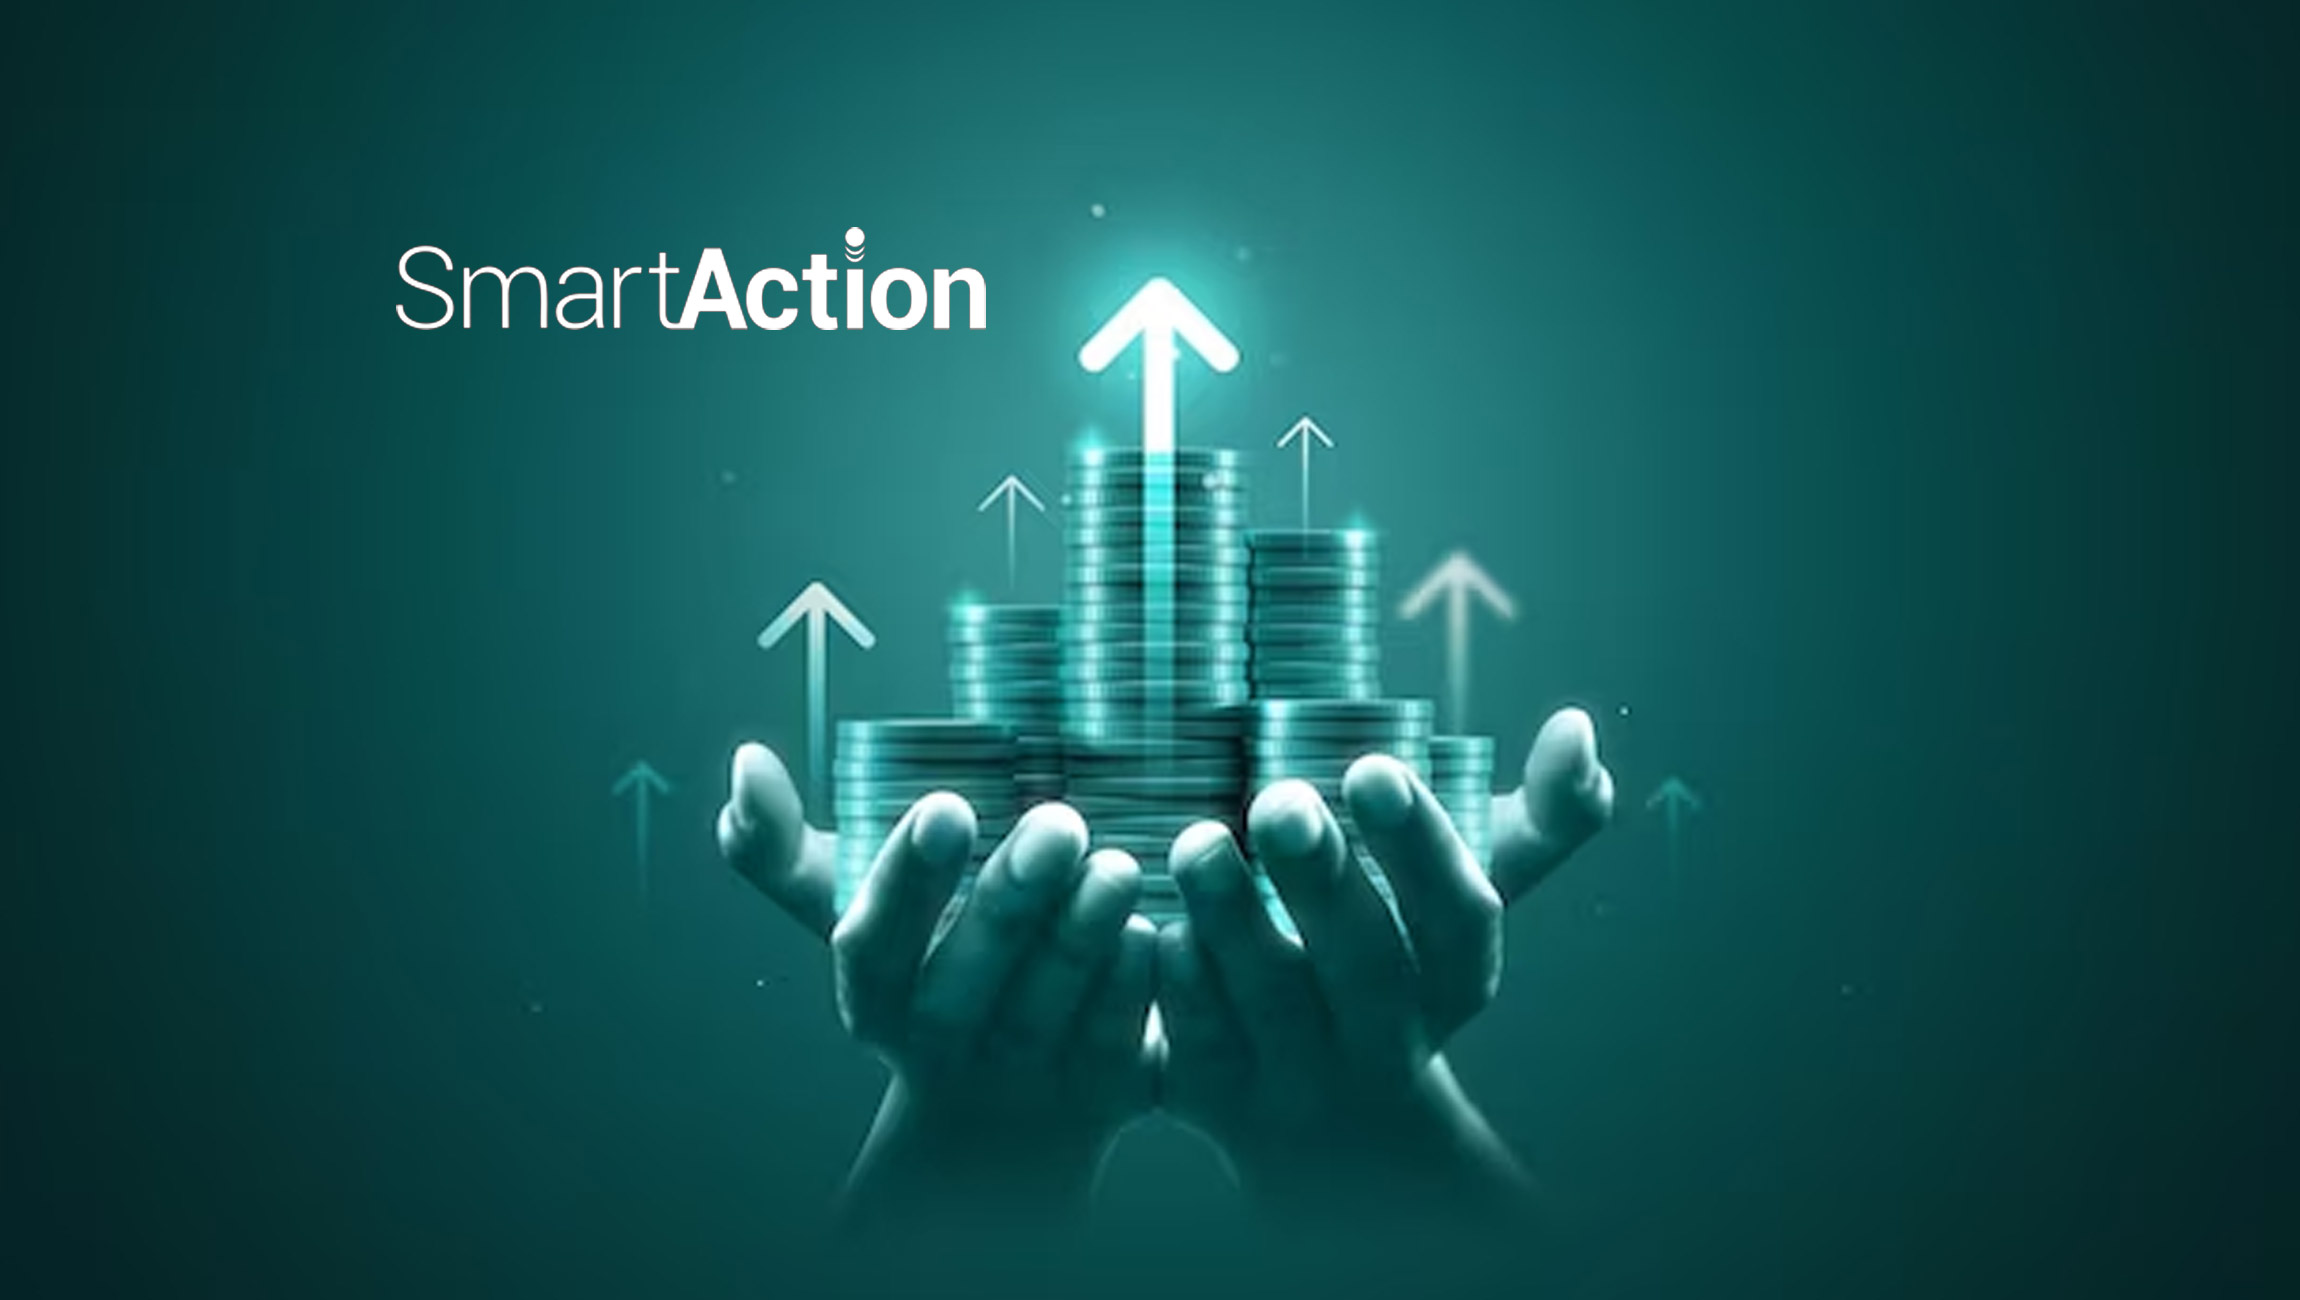 SmartAction Secures Additional Funding, Bringing Total Investment to $38 Million